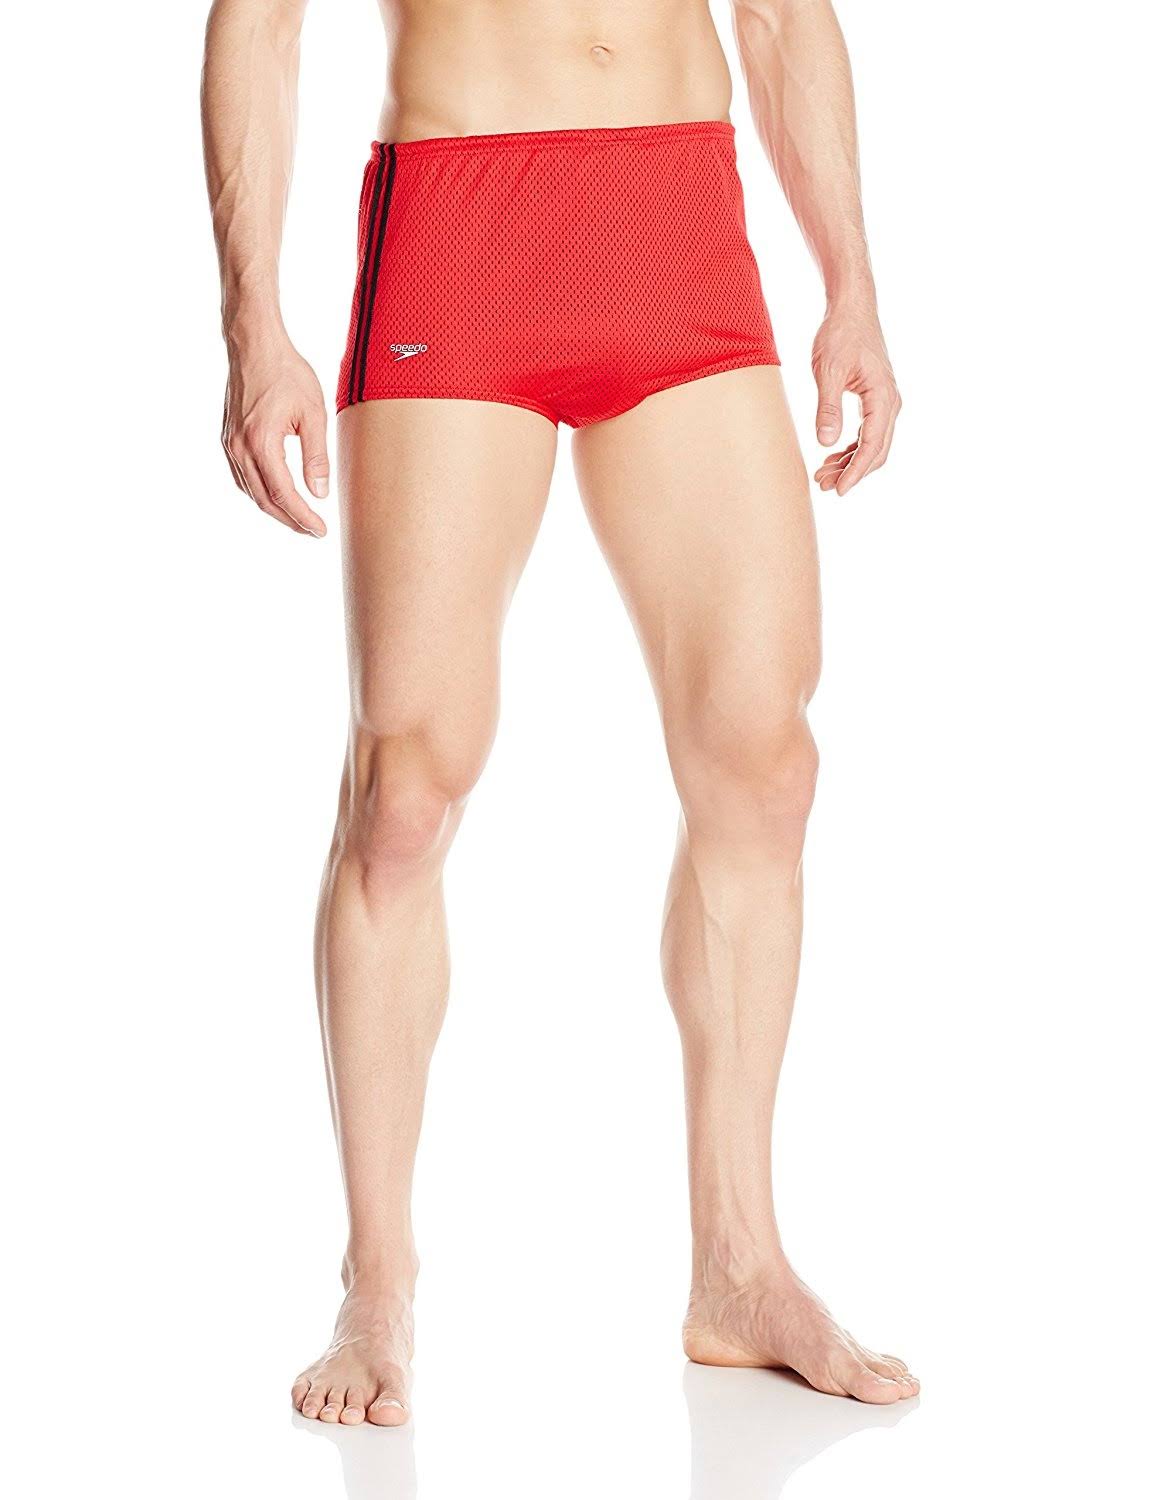 Speedo Men's Poly Mesh Square Leg Swimsuit | Athletic & Outdoor Clothing | Best Price Guarantee | 30 Day Money Back Guarantee | Delivery Guarantee